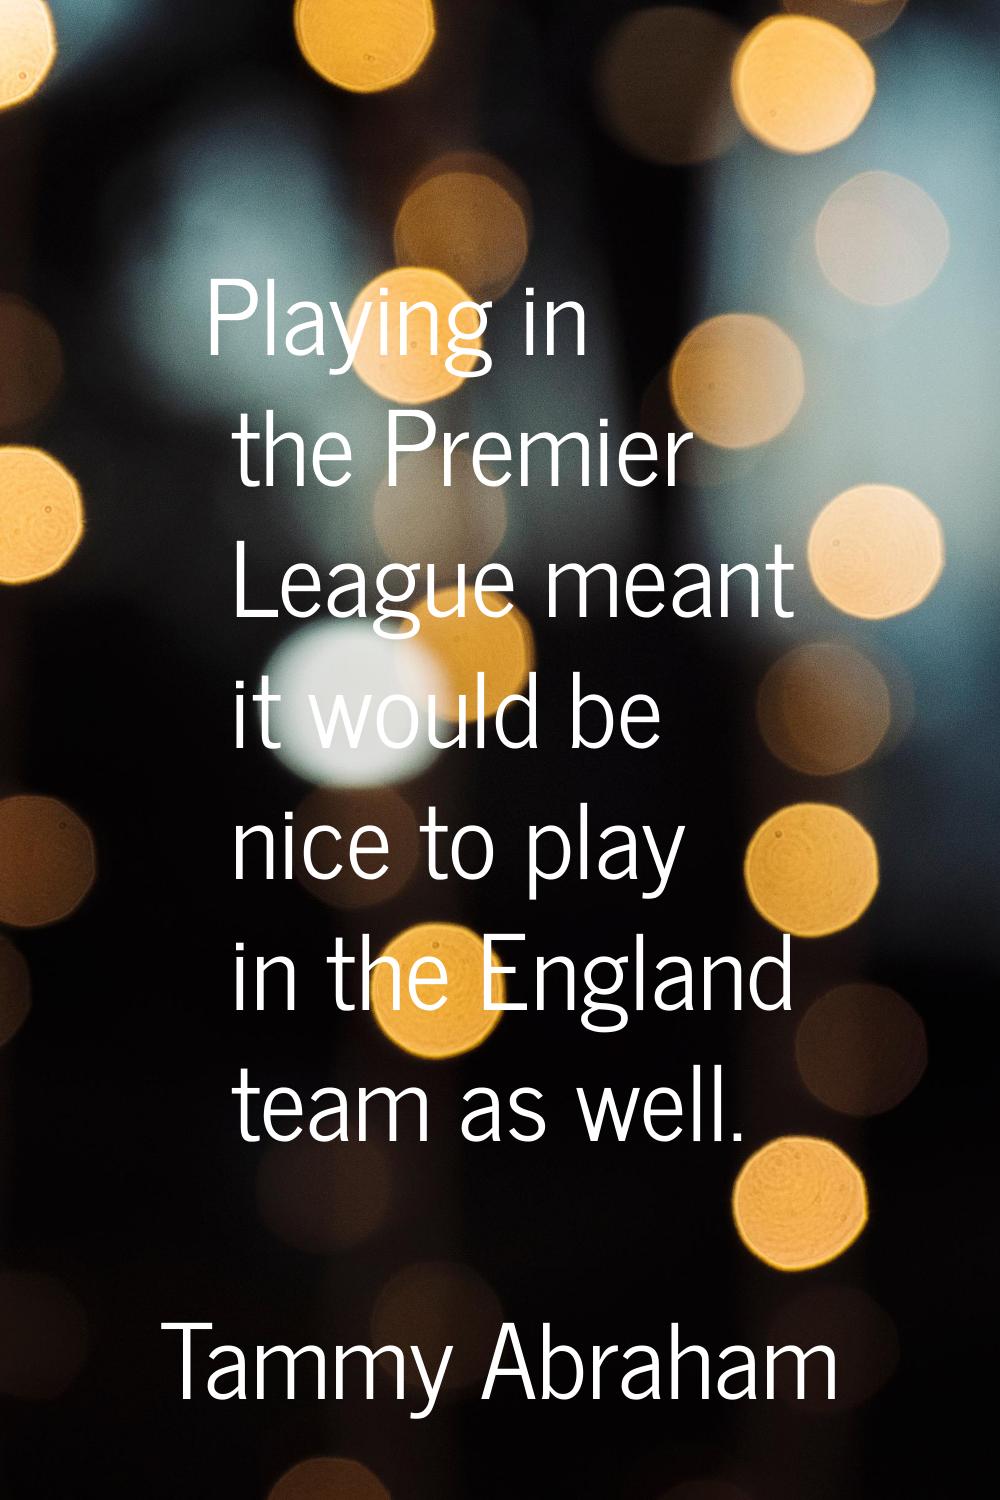 Playing in the Premier League meant it would be nice to play in the England team as well.